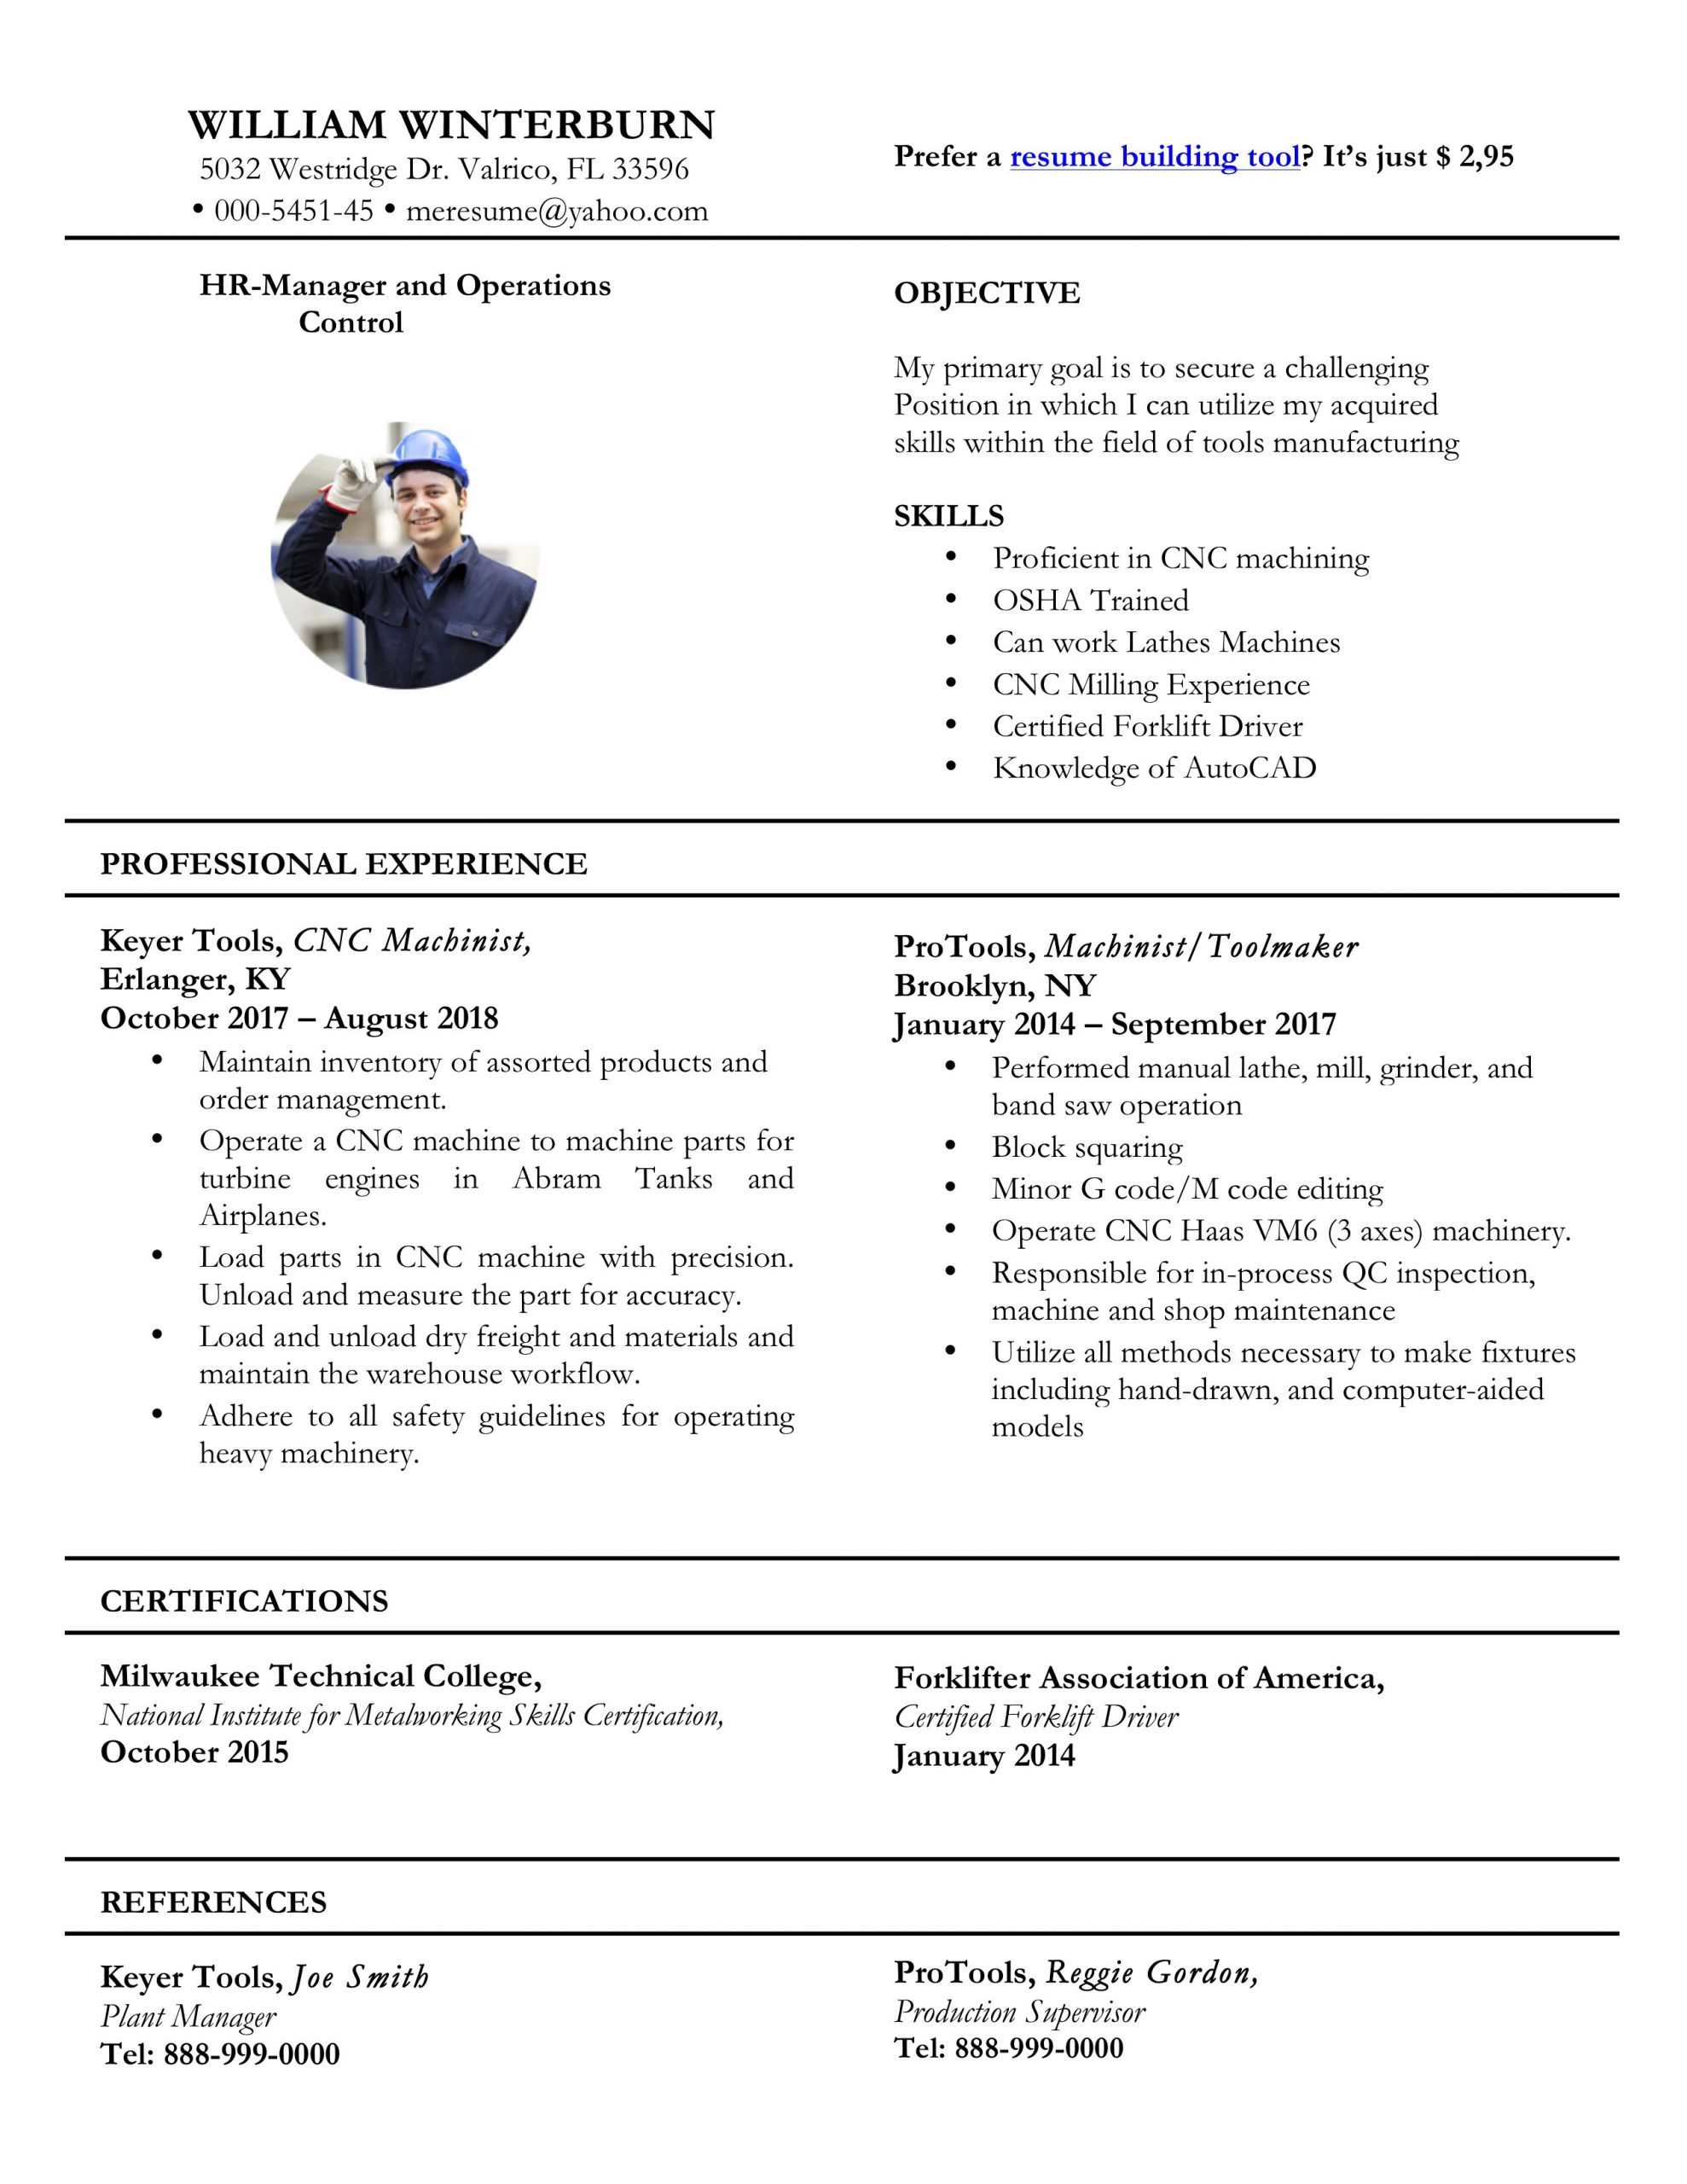 Sample Resume Download In Ms Word Resume Templates [2019] Pdf and Word